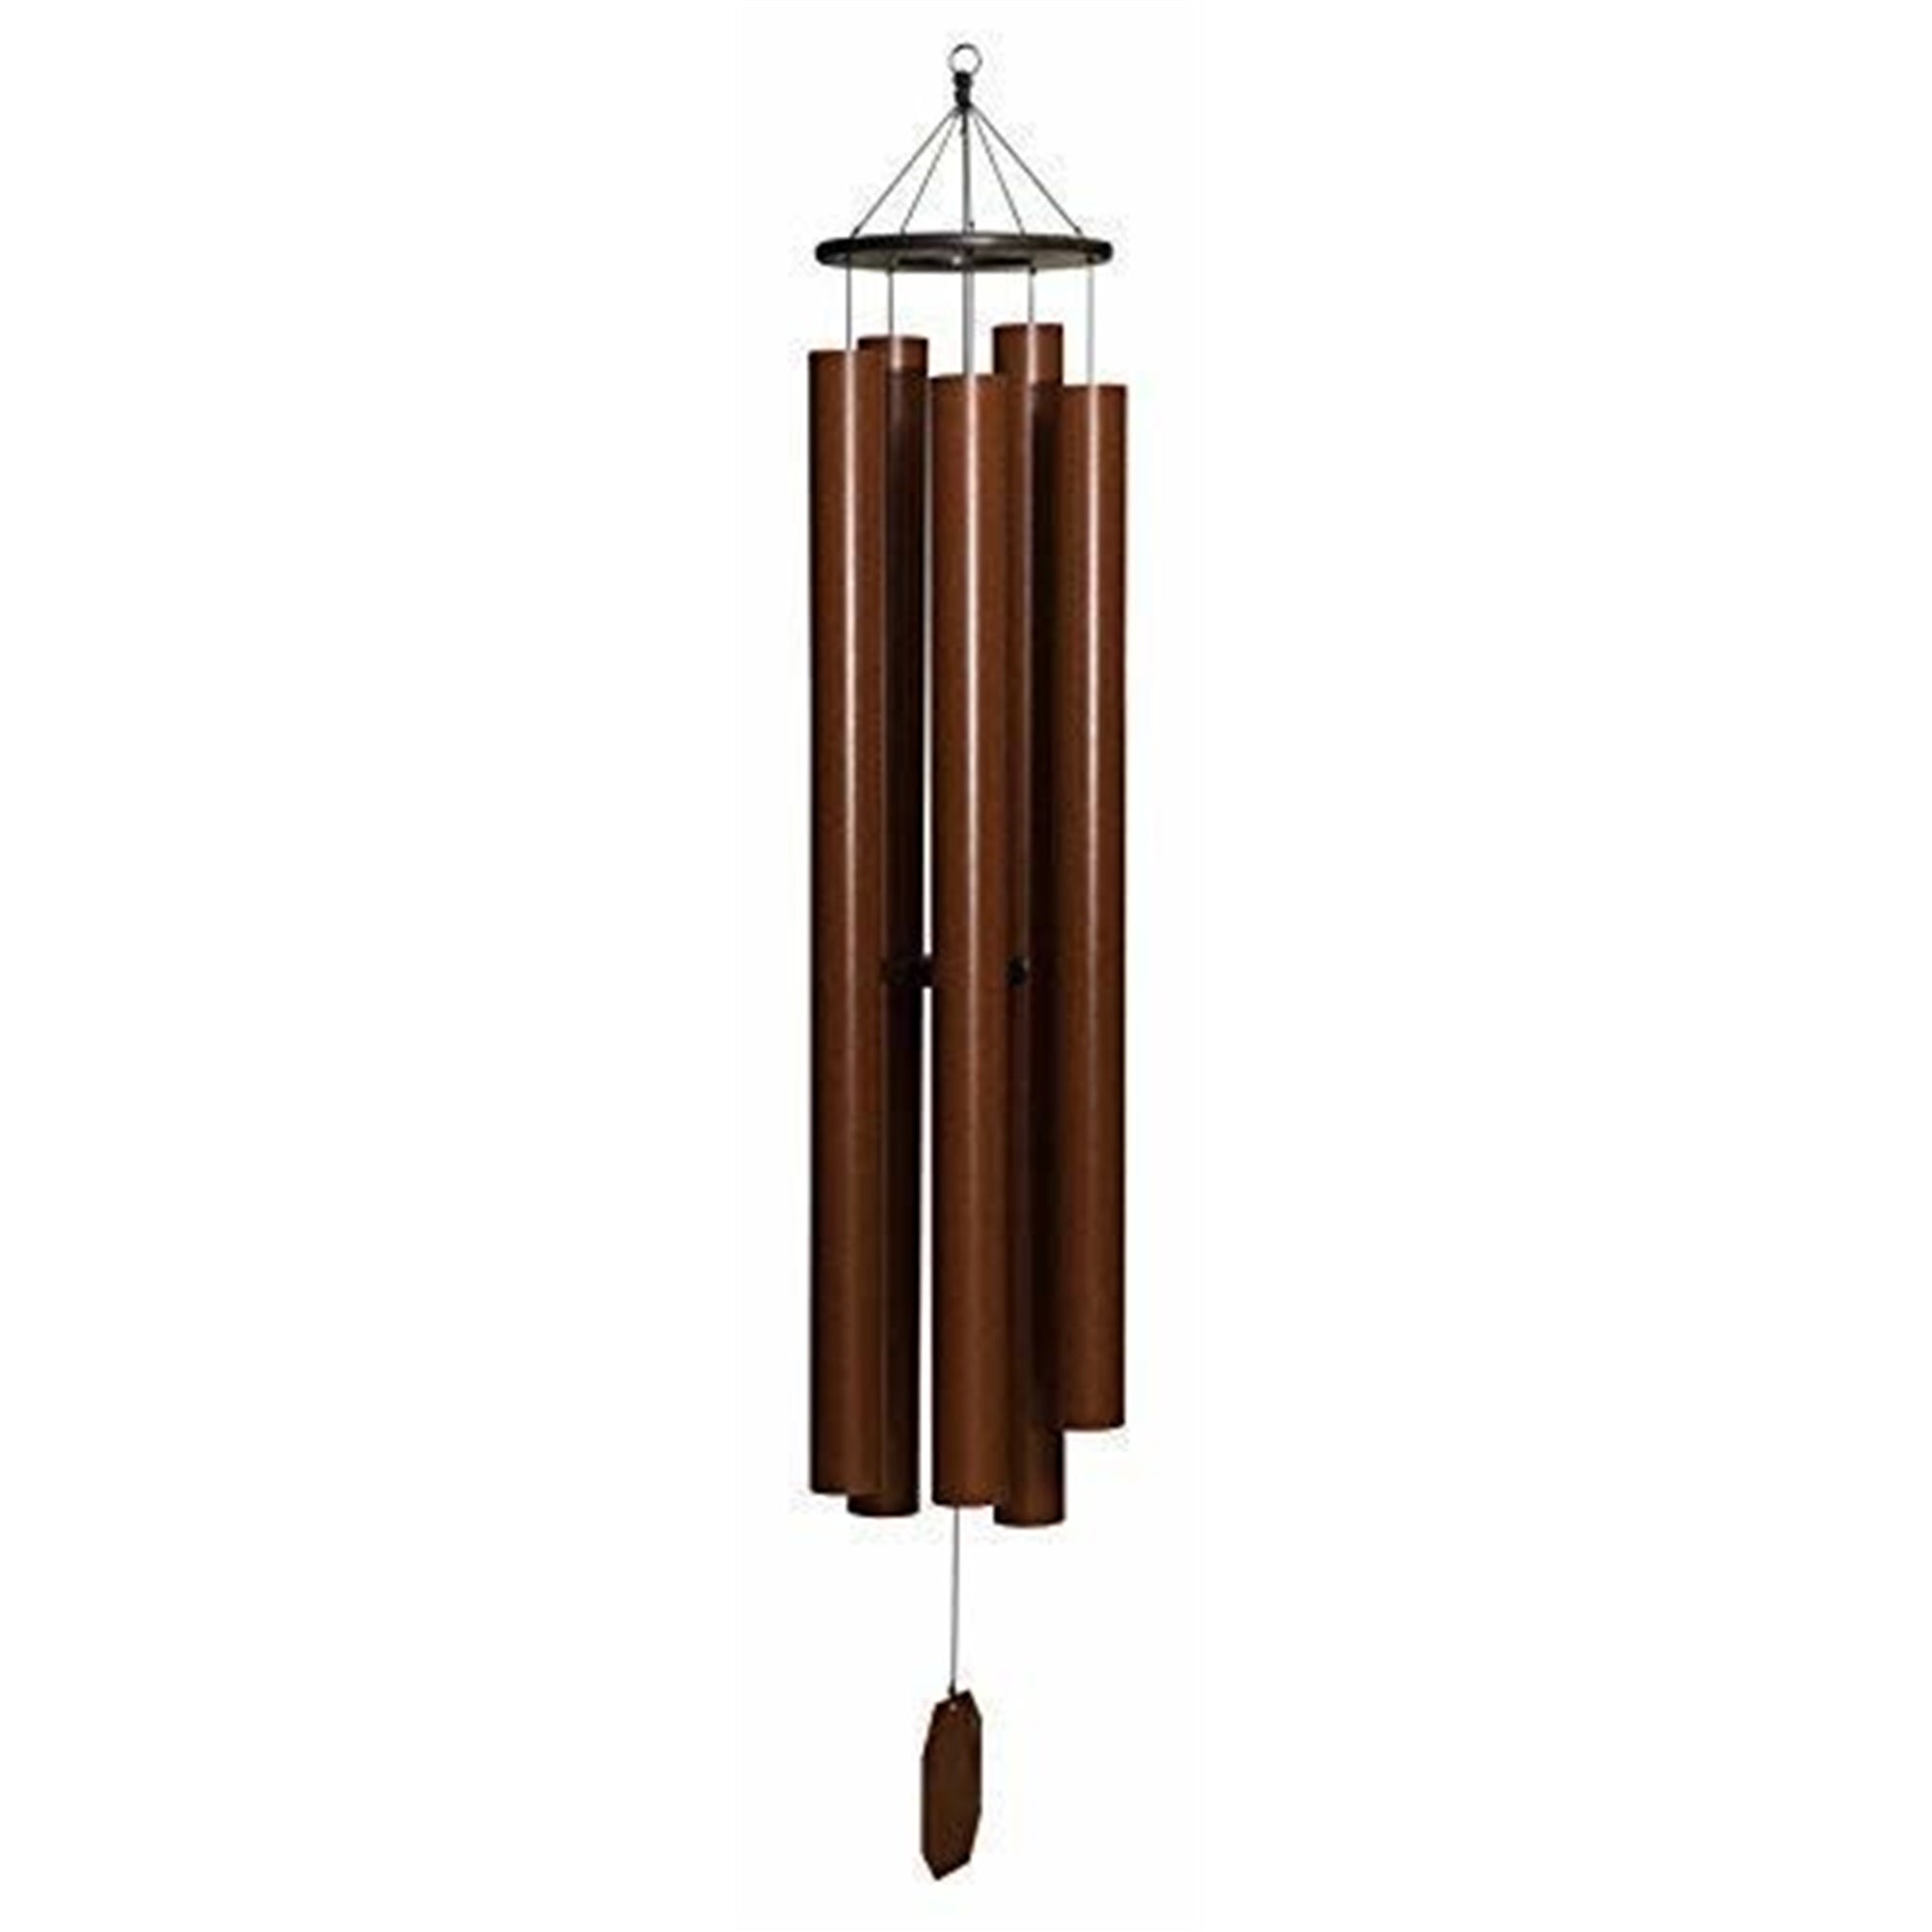 Lambright Chimes Spirit of Maroon Wind Chime - Amish Handcrafted, 75"